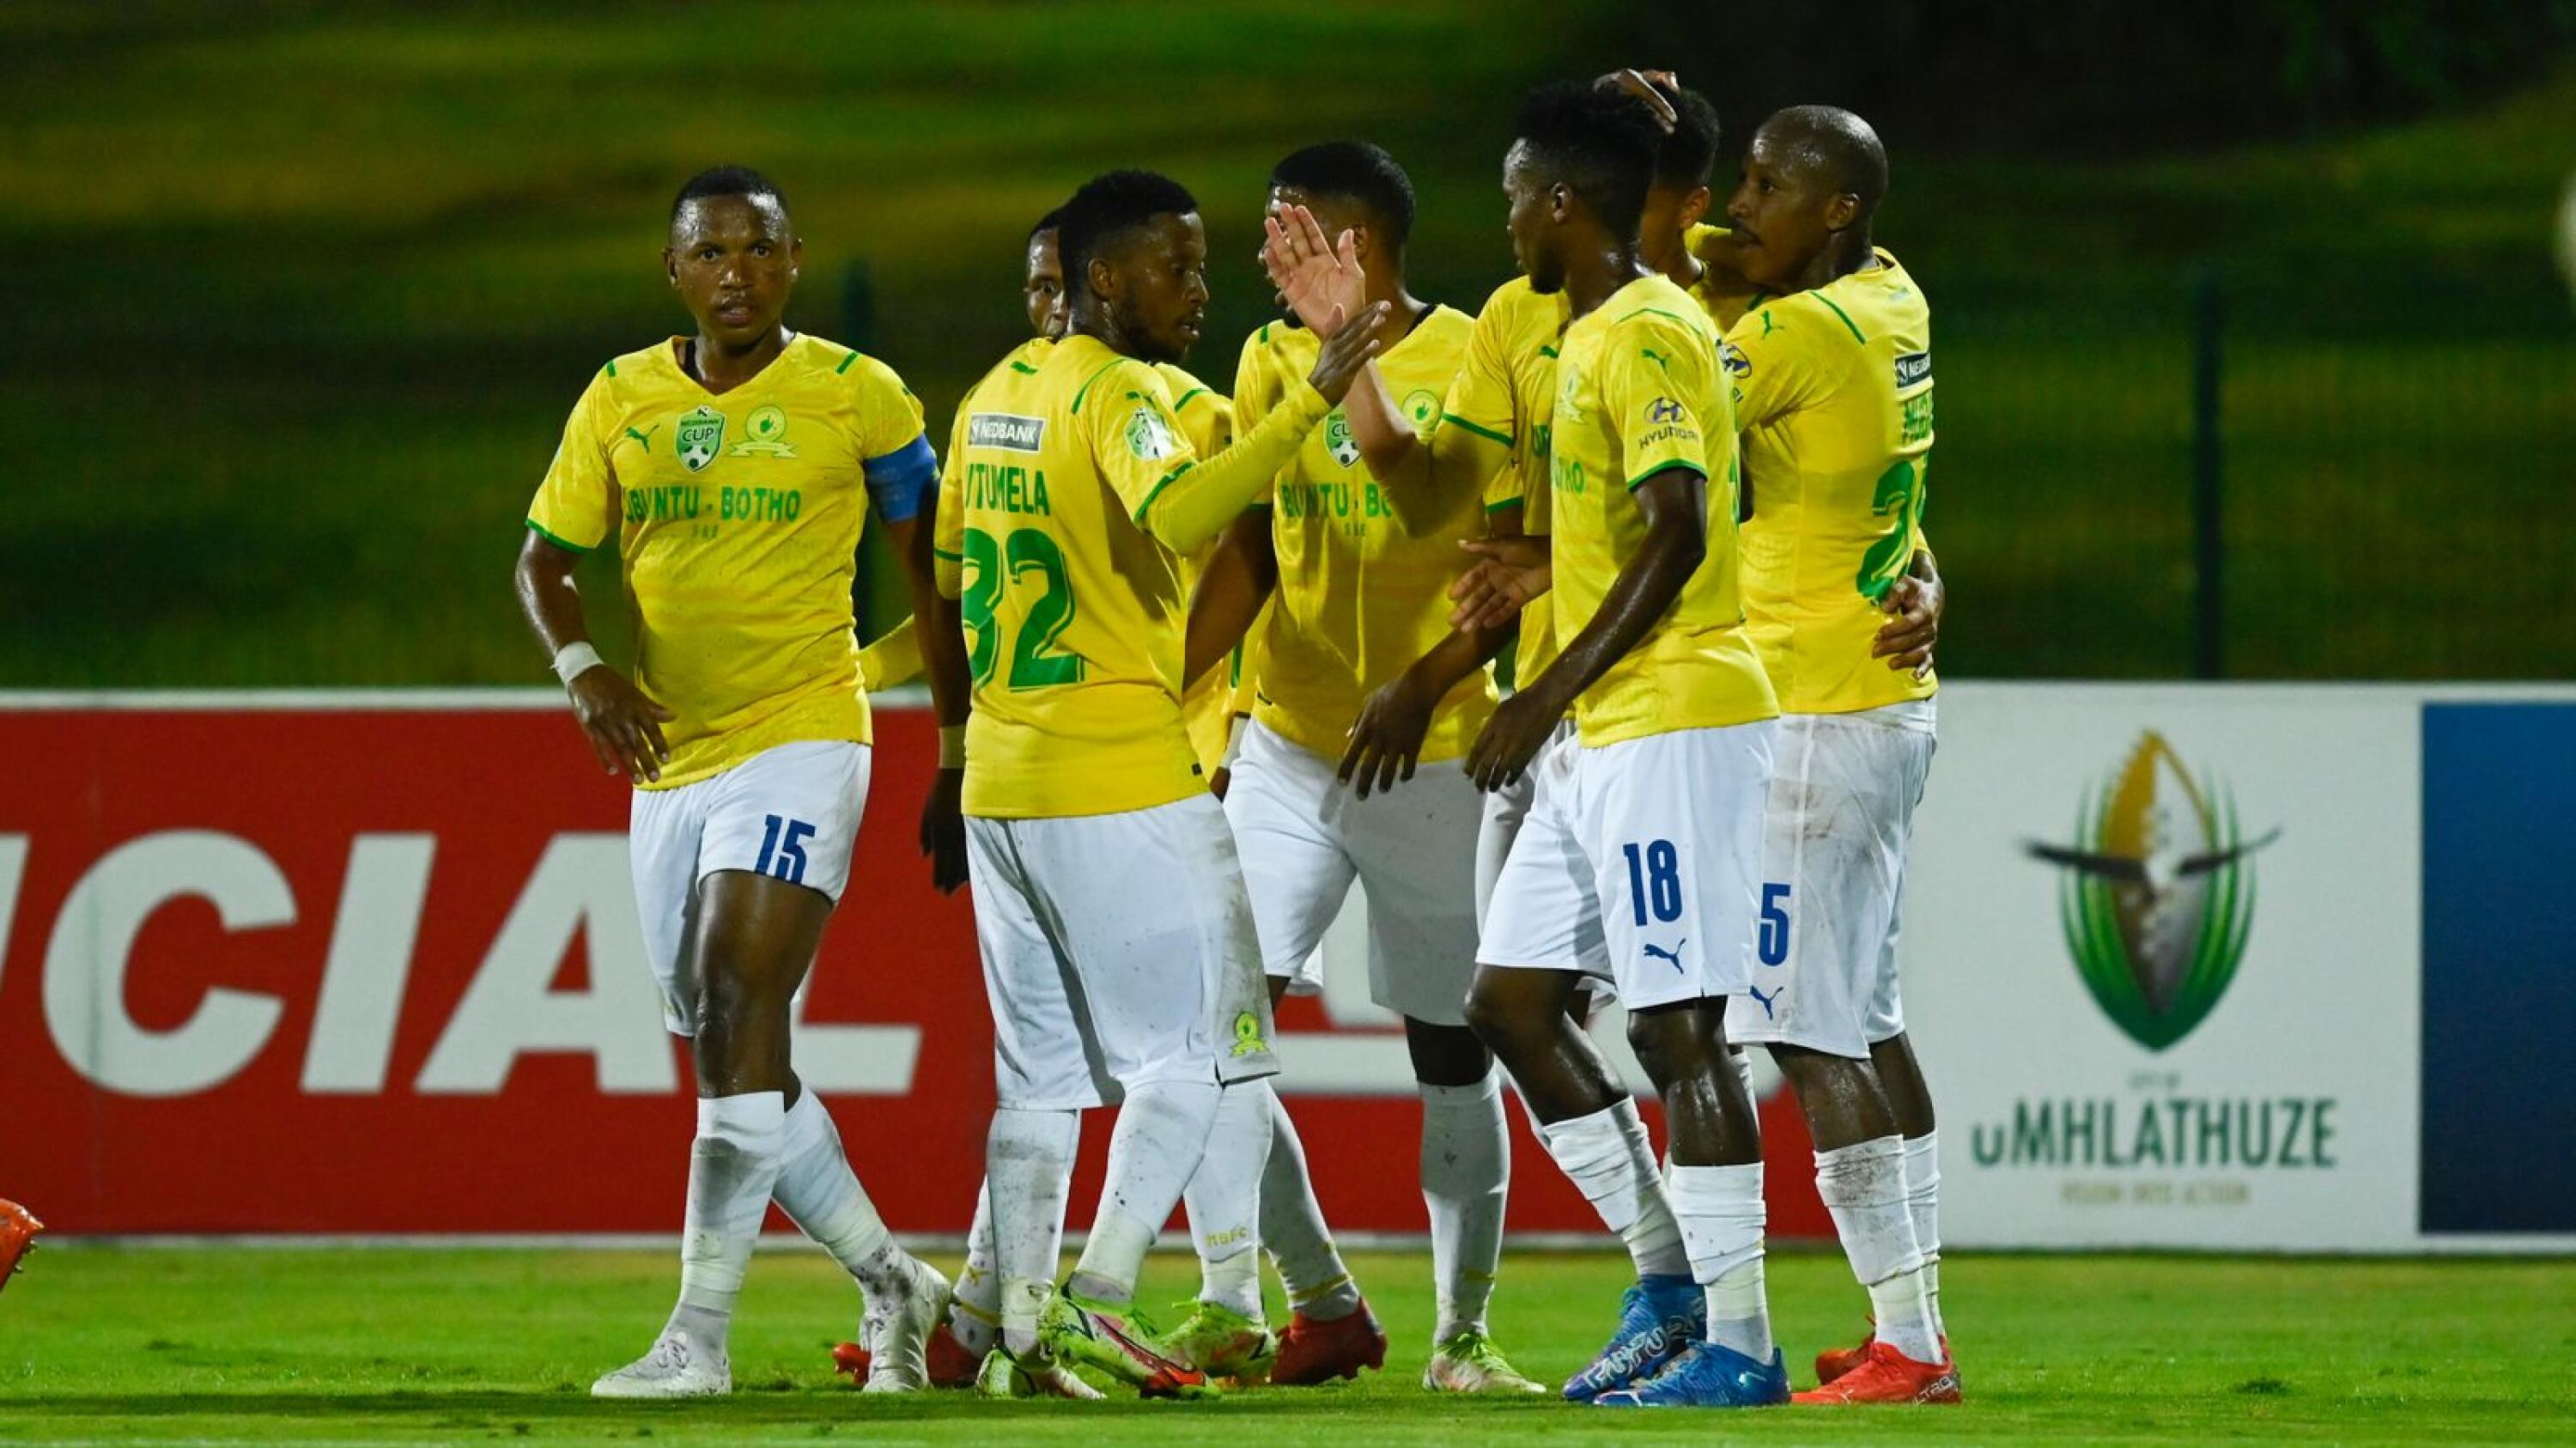 Mamelodi Sundowns players celebrate with defender Rushine de Reuck after he scored their second goal during their Nedbank Cup Last 32 game against Richards Bay at Princess Magogo Stadium in Durban on Friday